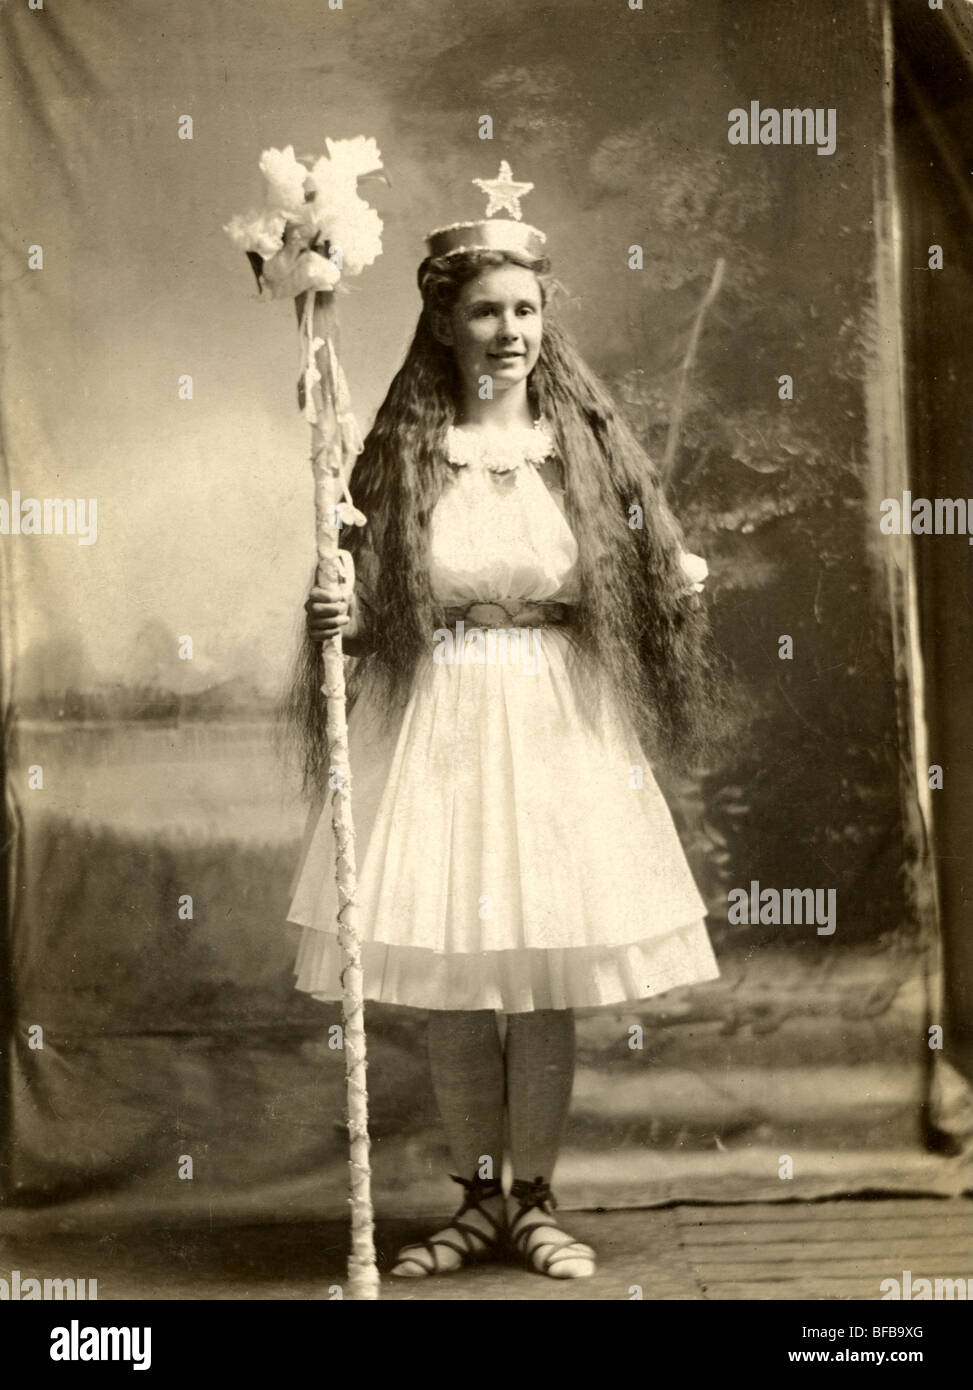 Long Haired Edna Pease Wearing Princess Costume Stock Photo